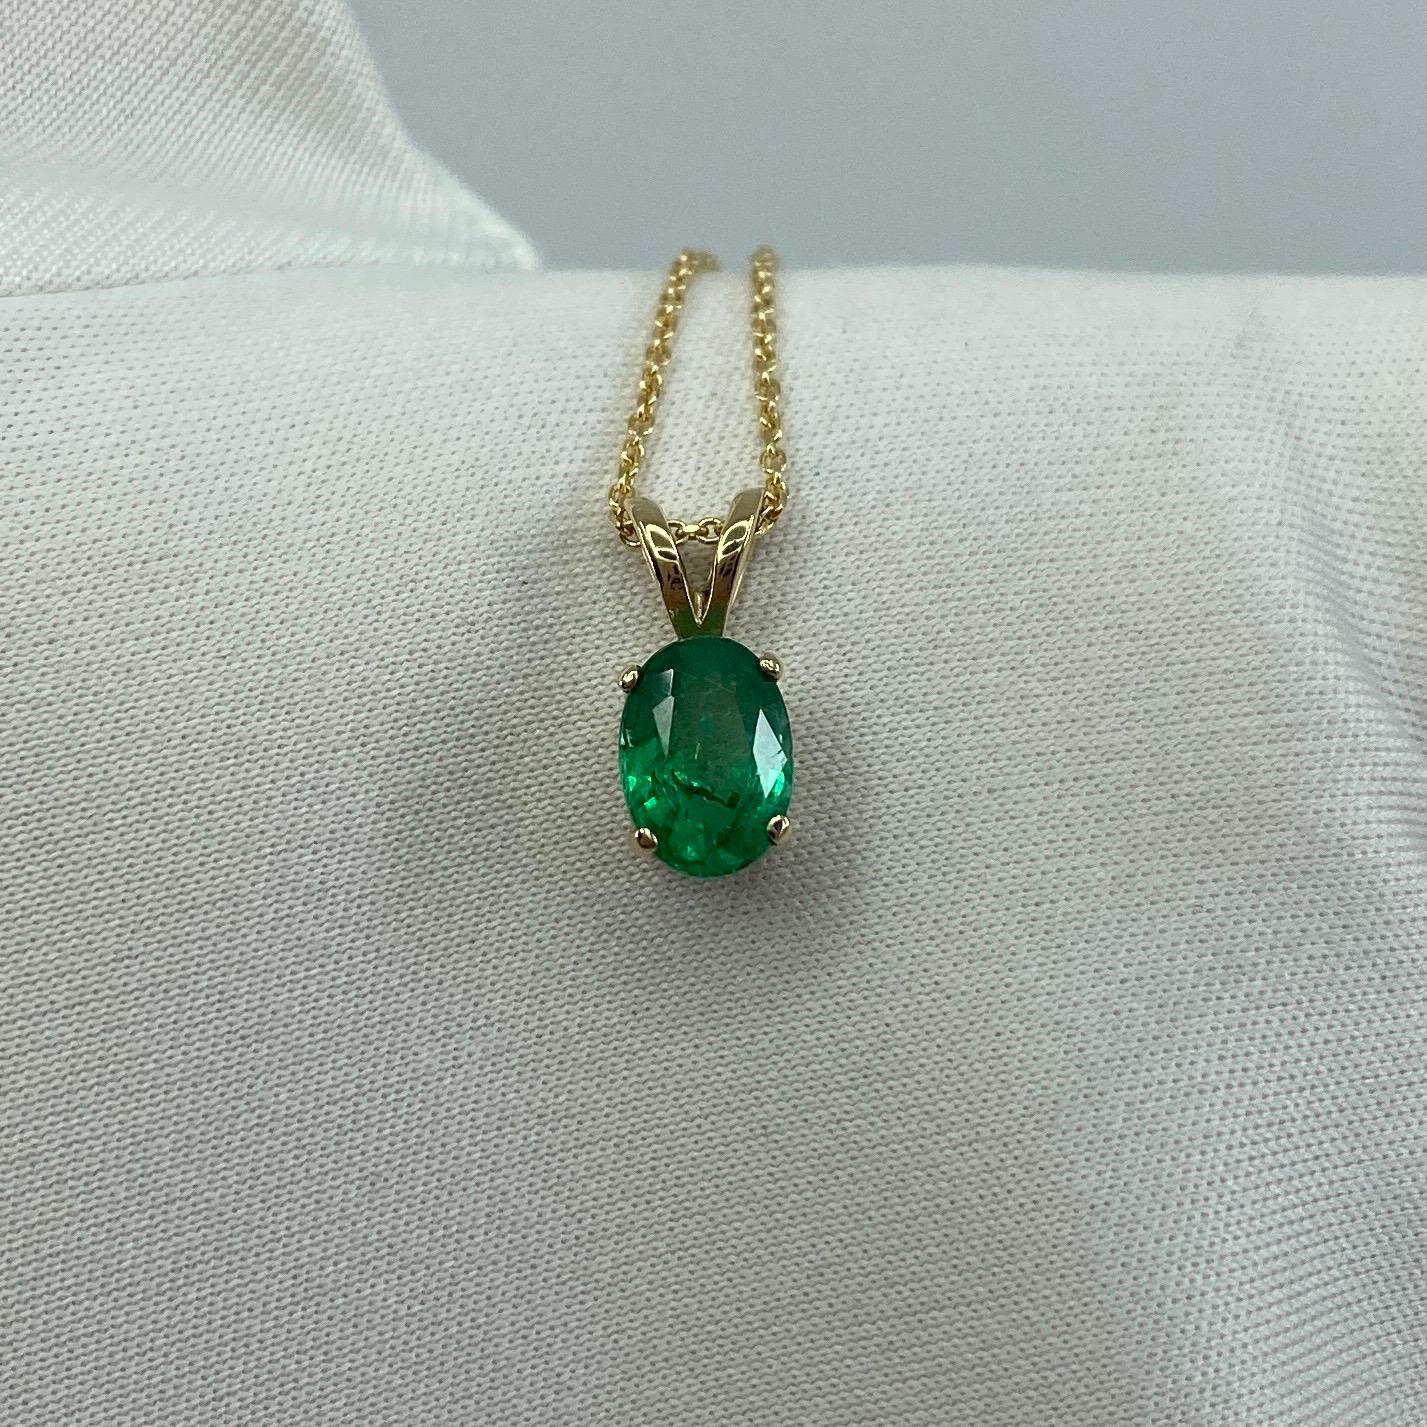 0.85 Carat Vivid Green Emerald Oval Cut Yellow Gold Solitaire Pendant Necklace 6